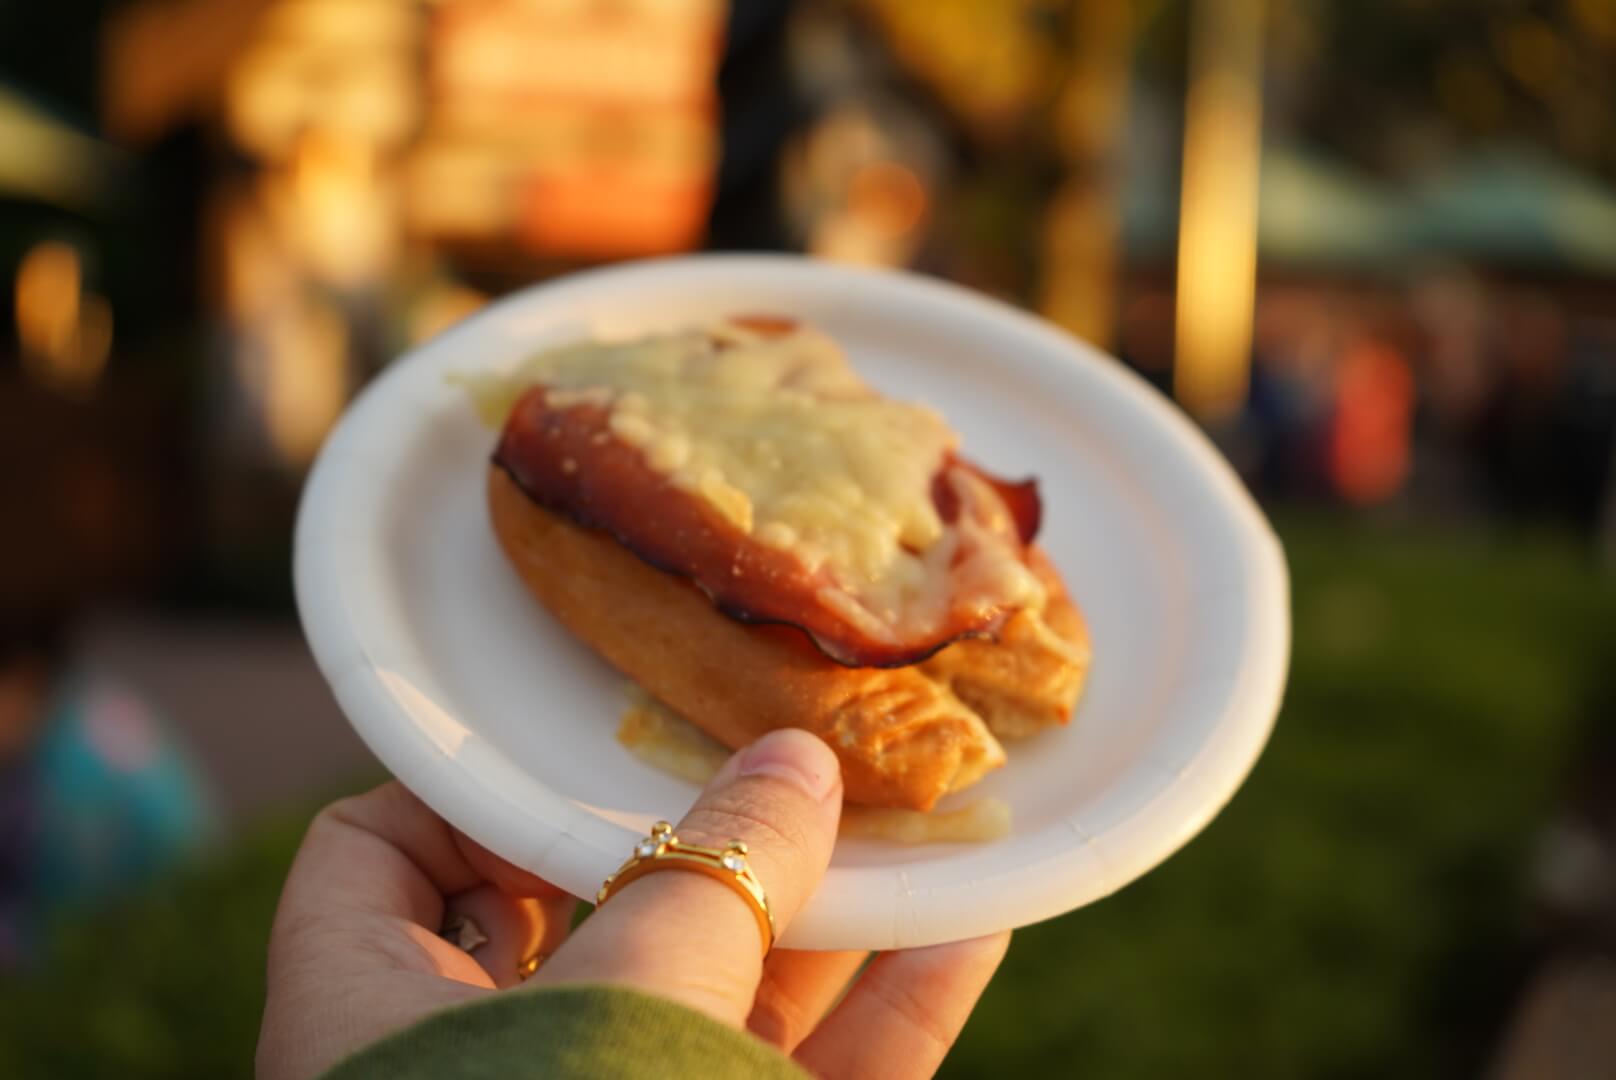 Toasted Pretzel Bread with black forest ham and melted gruyere cheese from Epcot Flower and Garden Festival 2019